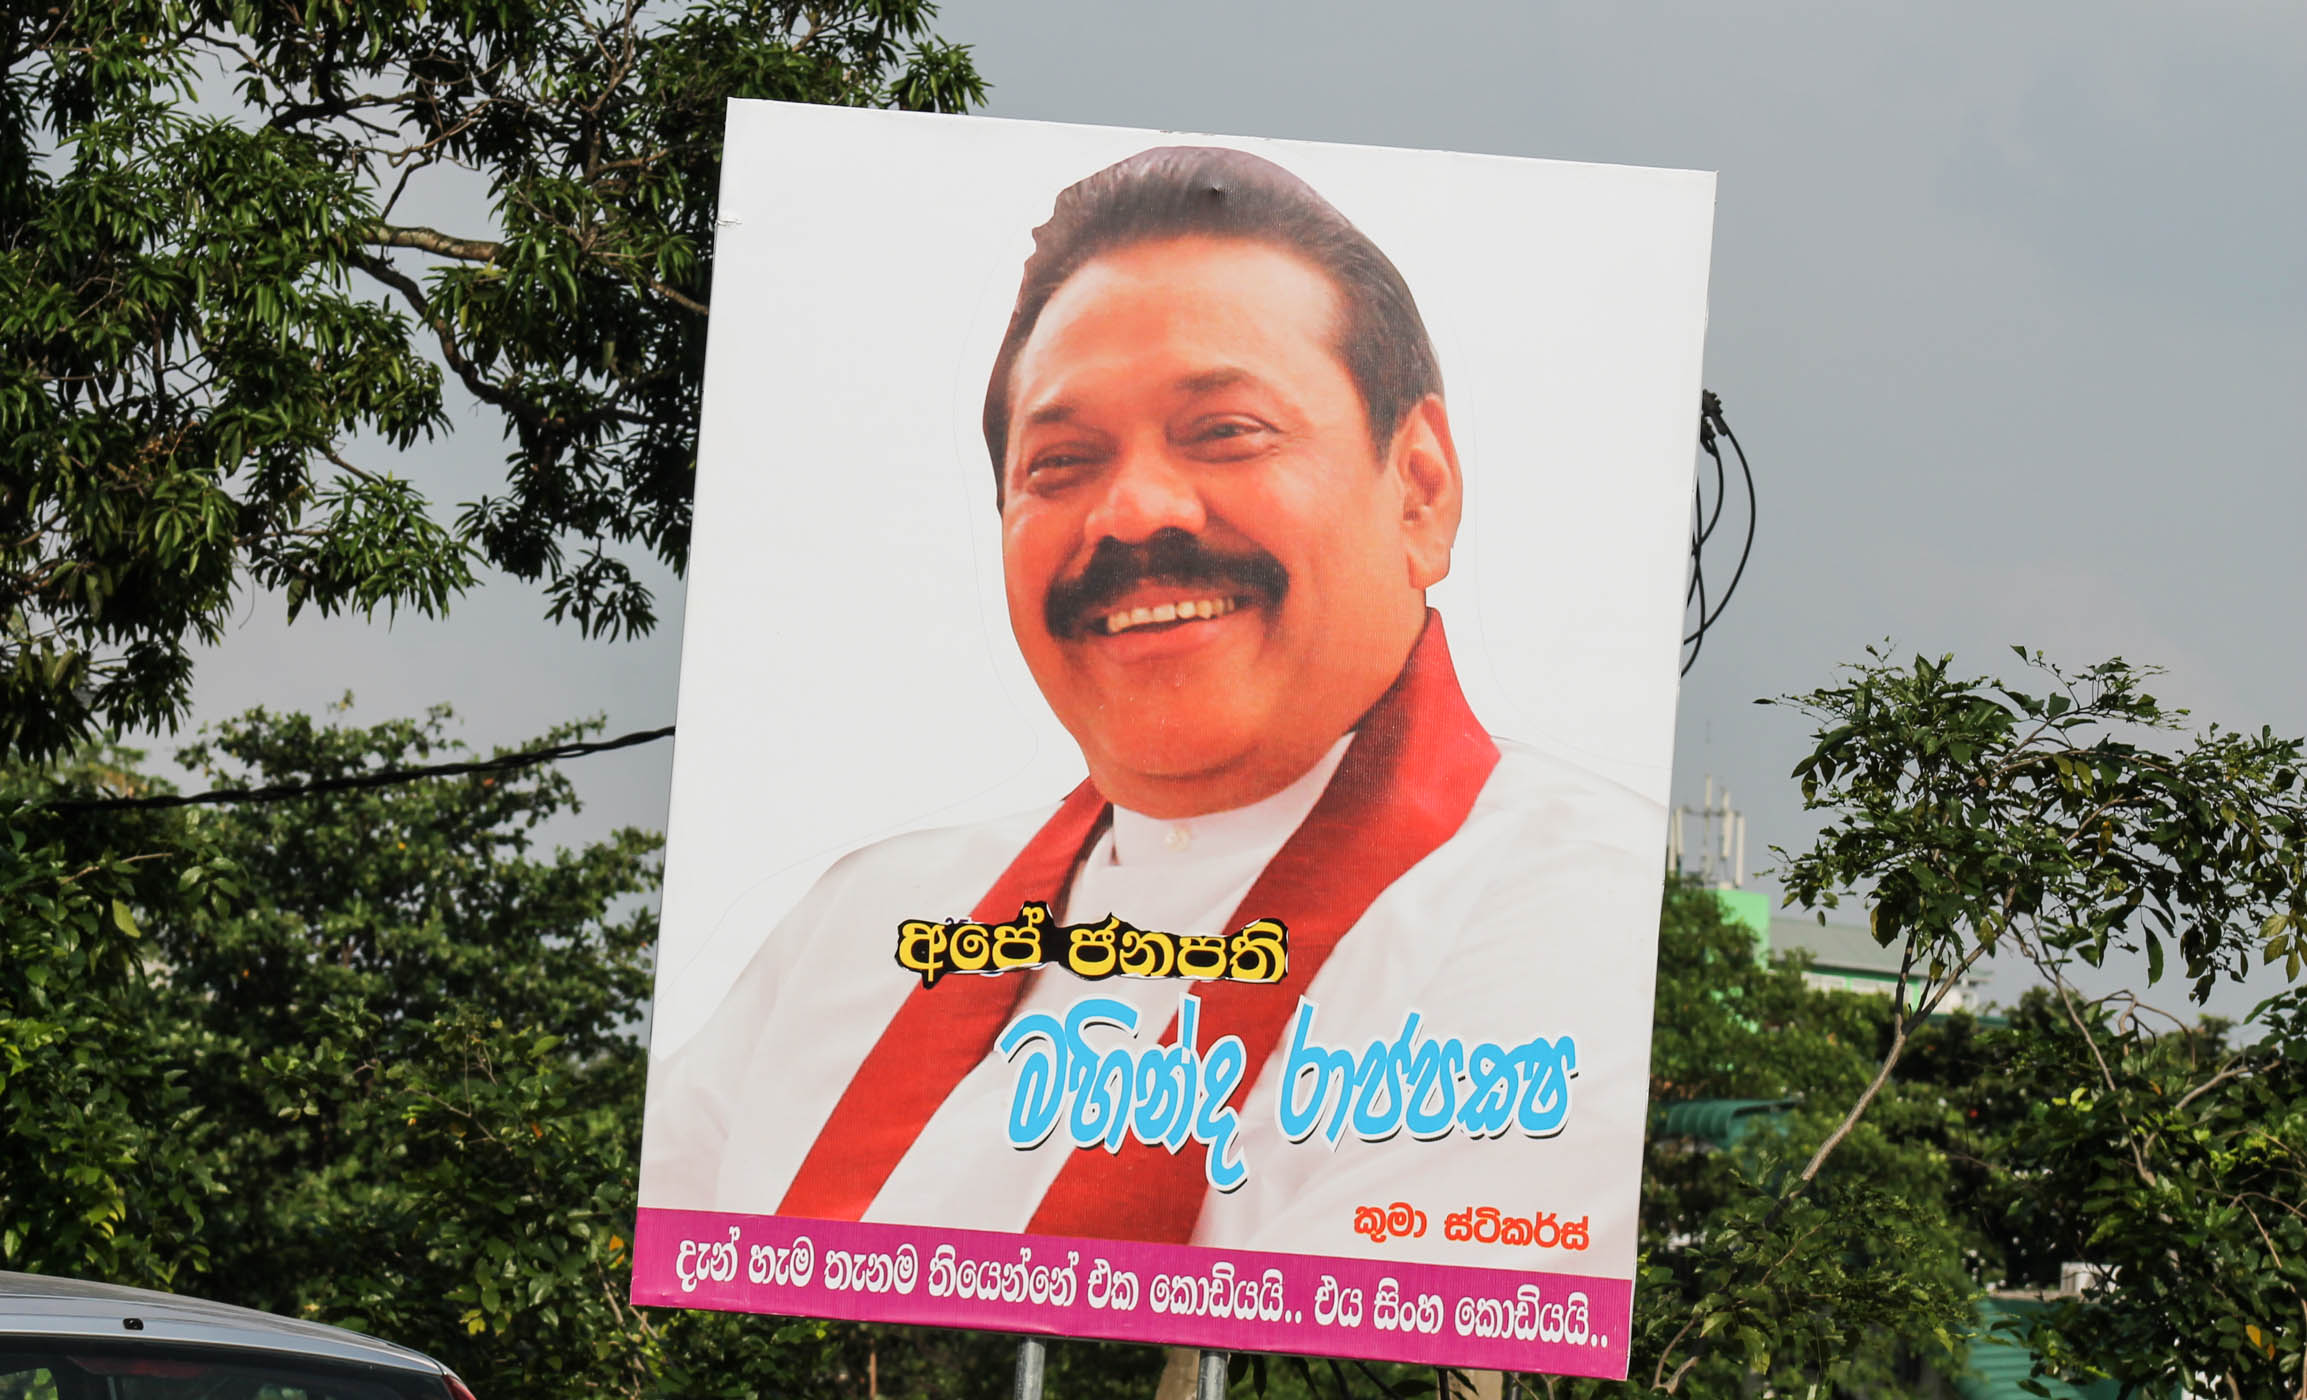 large billboard about a smiling man with trees in the background